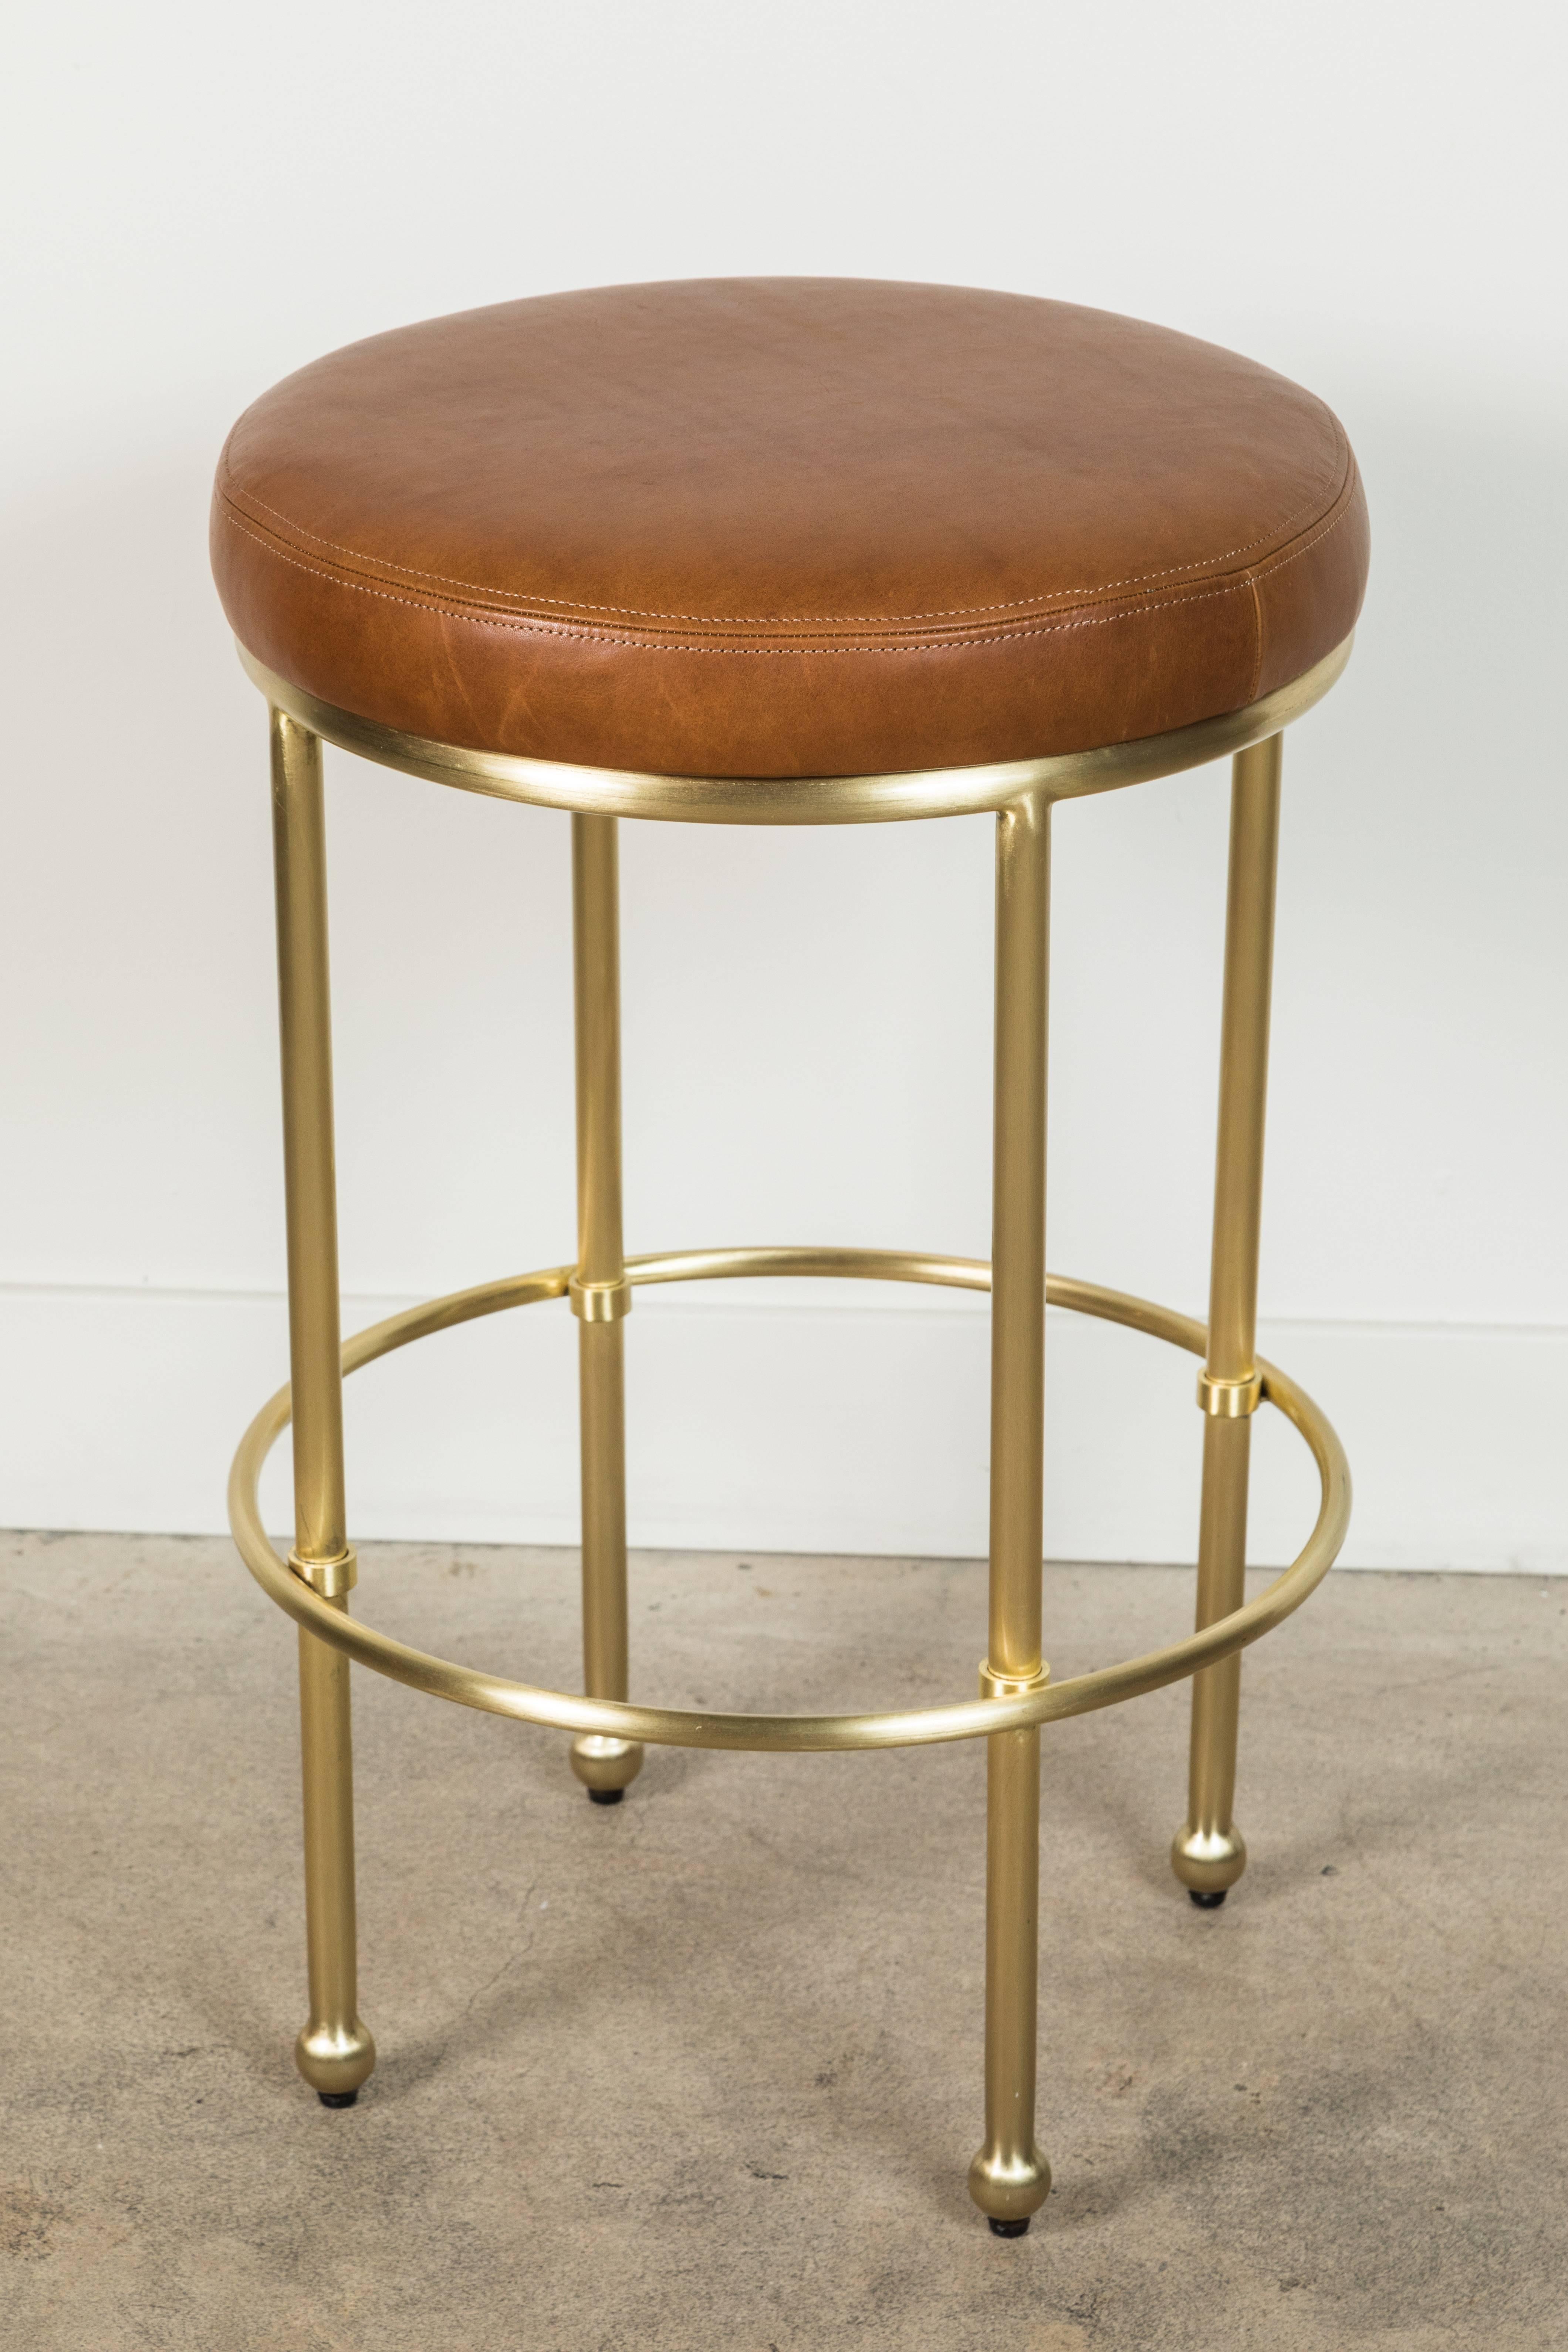 The Orsini barstool is made with a solid brass spun base that features rounded feet and an upholstered seat. Shown here in satin brass.

Available to order in customers own material with a 10-12 week lead time.

As shown: $1,451
To order: $1,325 +